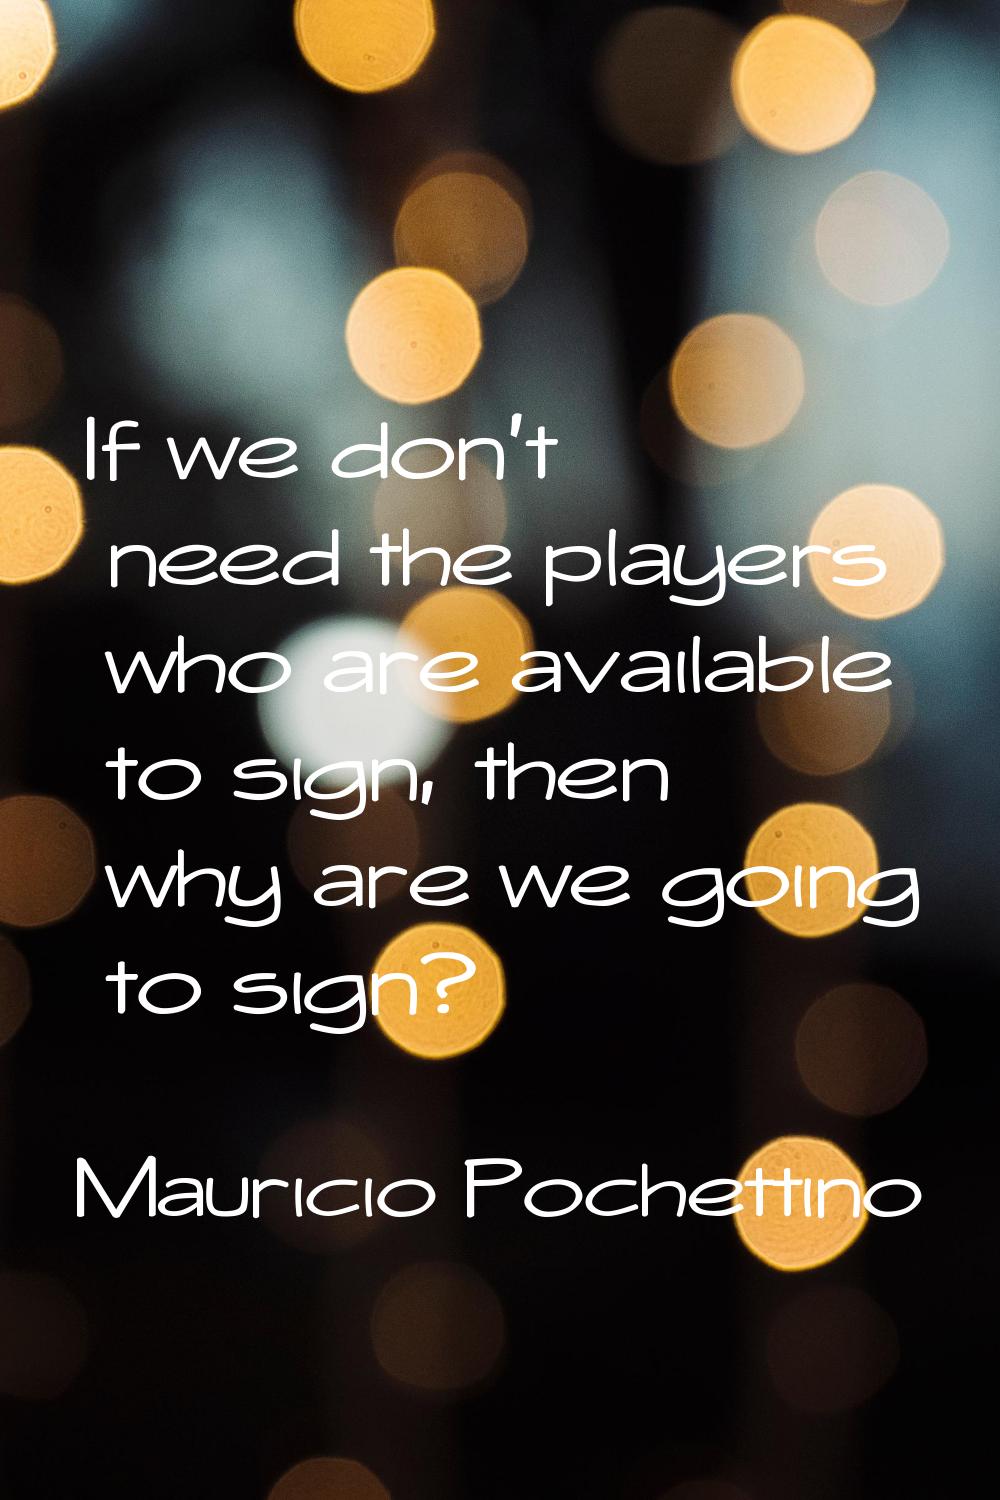 If we don't need the players who are available to sign, then why are we going to sign?